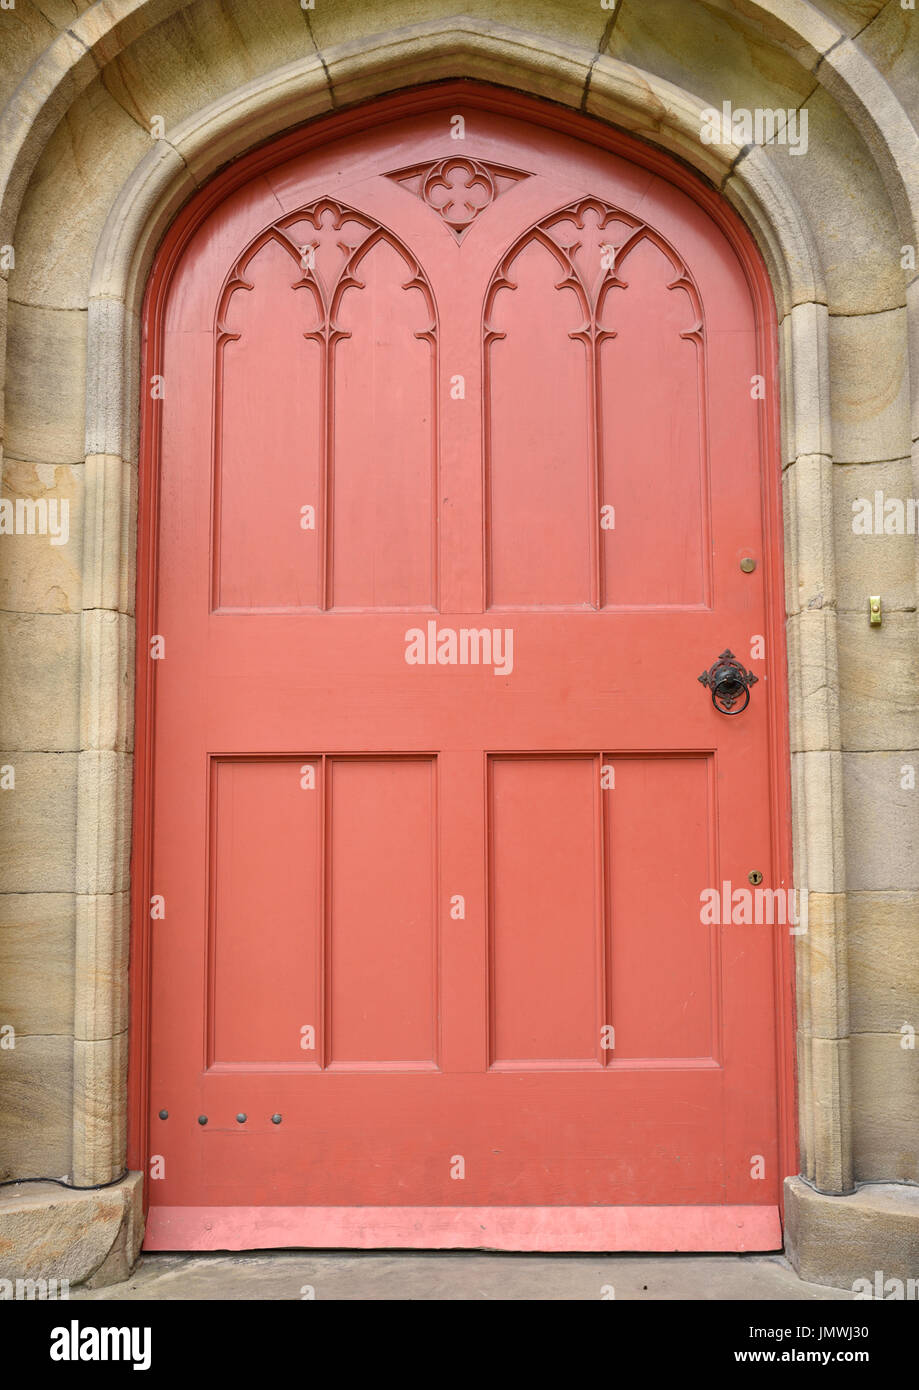 Red Wooden church door in stone surround all saints church stand Stock Photo